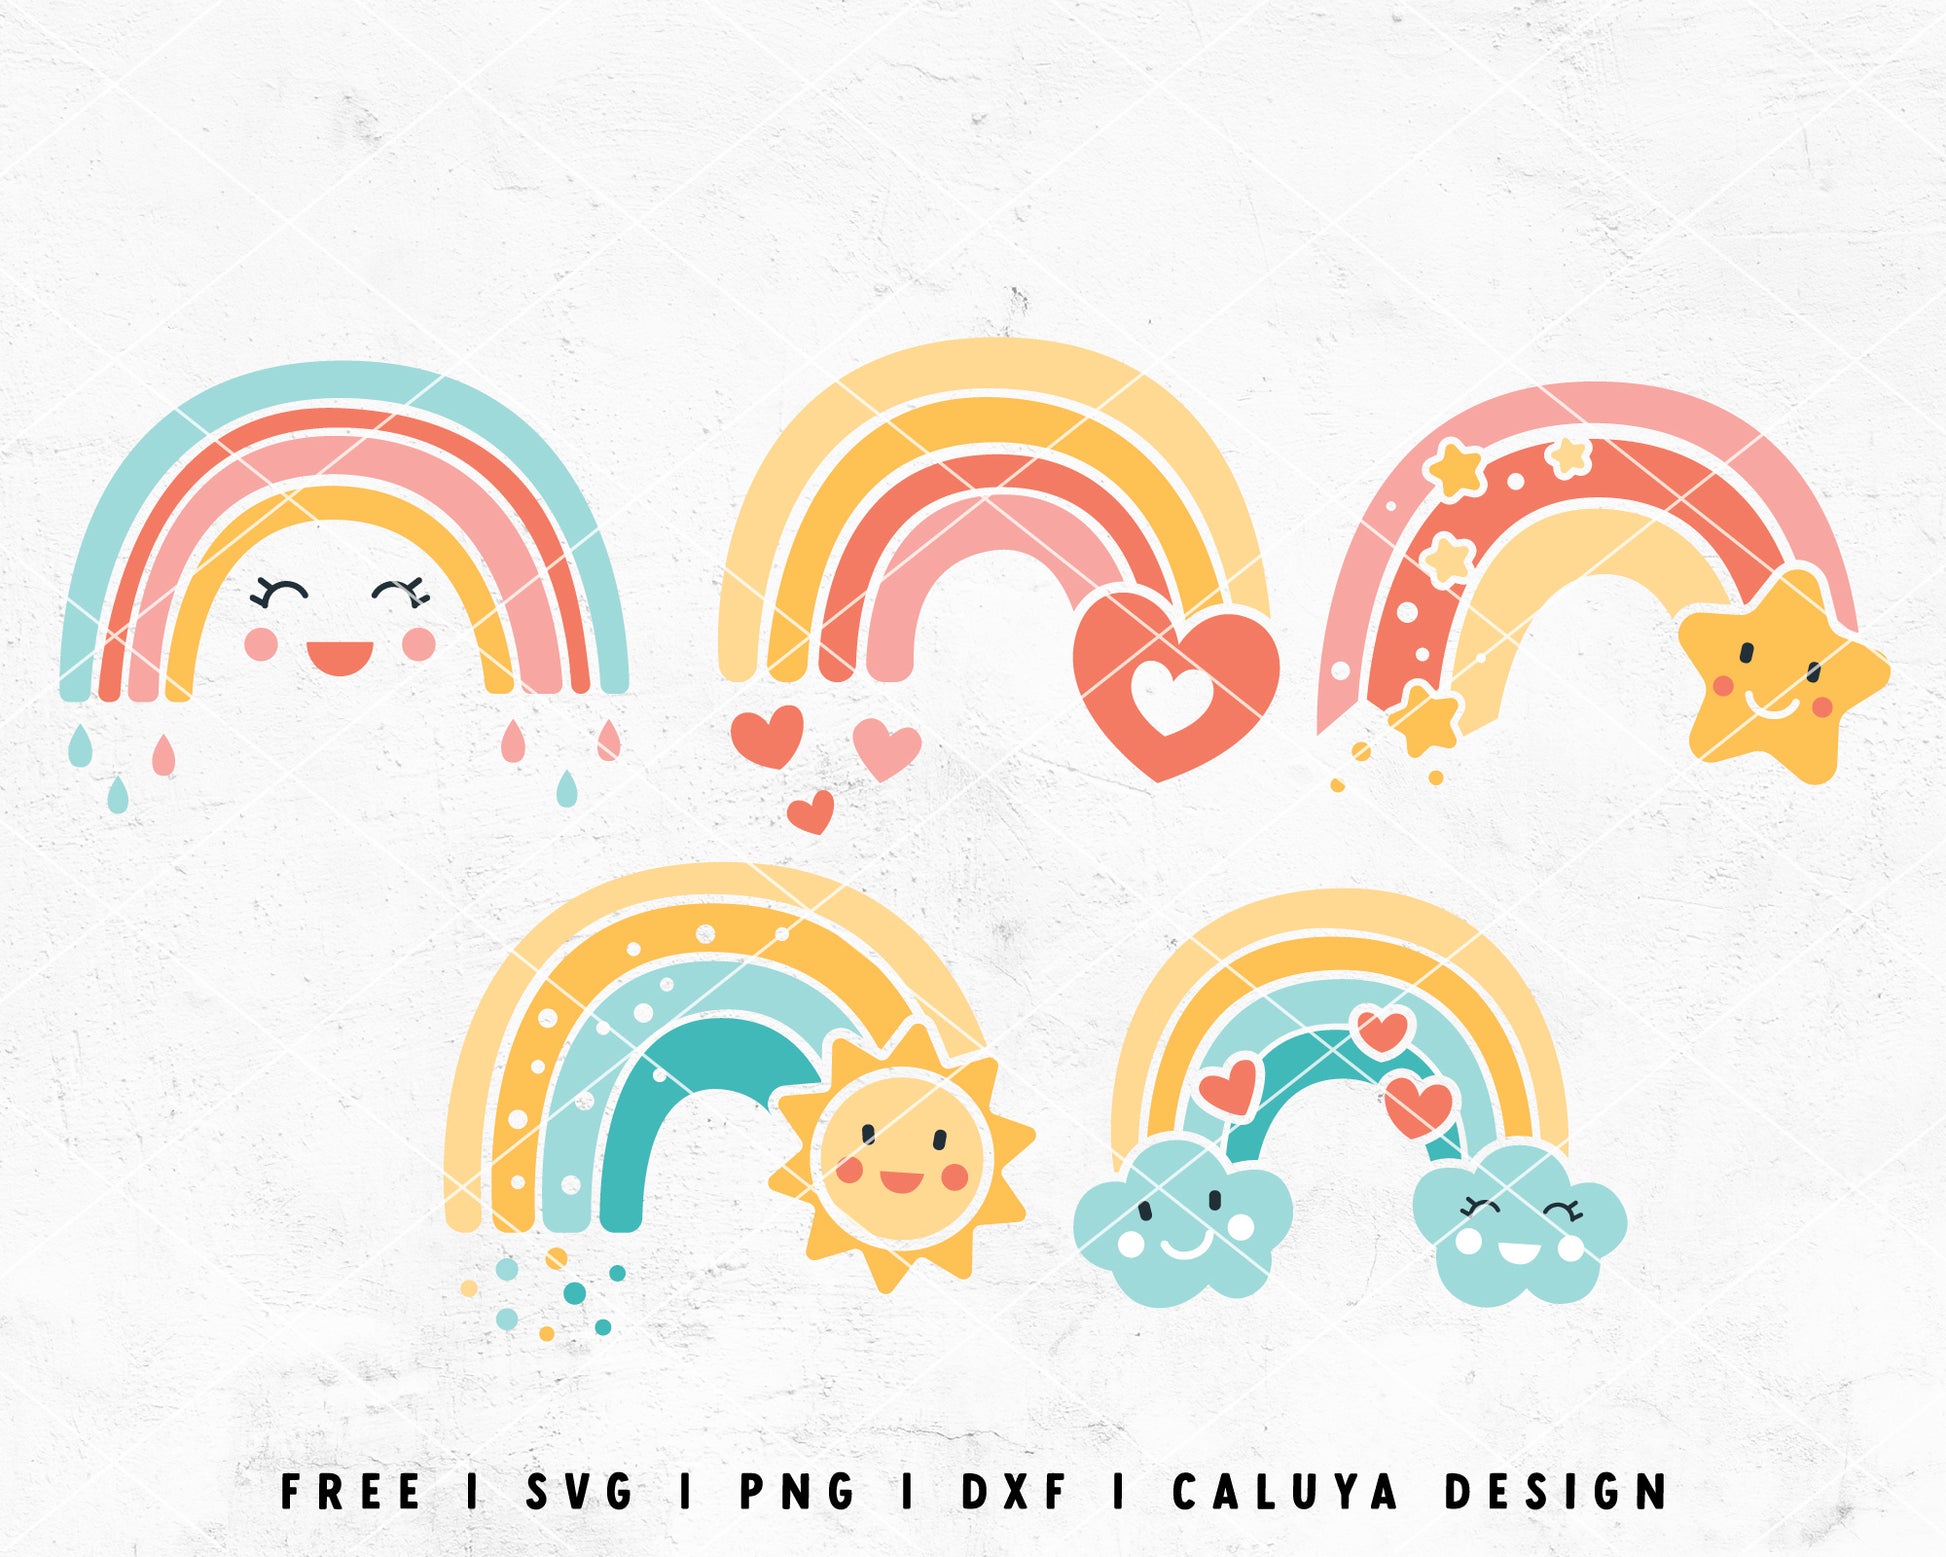 FREE Rainbow SVG | Kids Baby SVG Cut File for Cricut, Cameo Silhouette | Free SVG Cut File